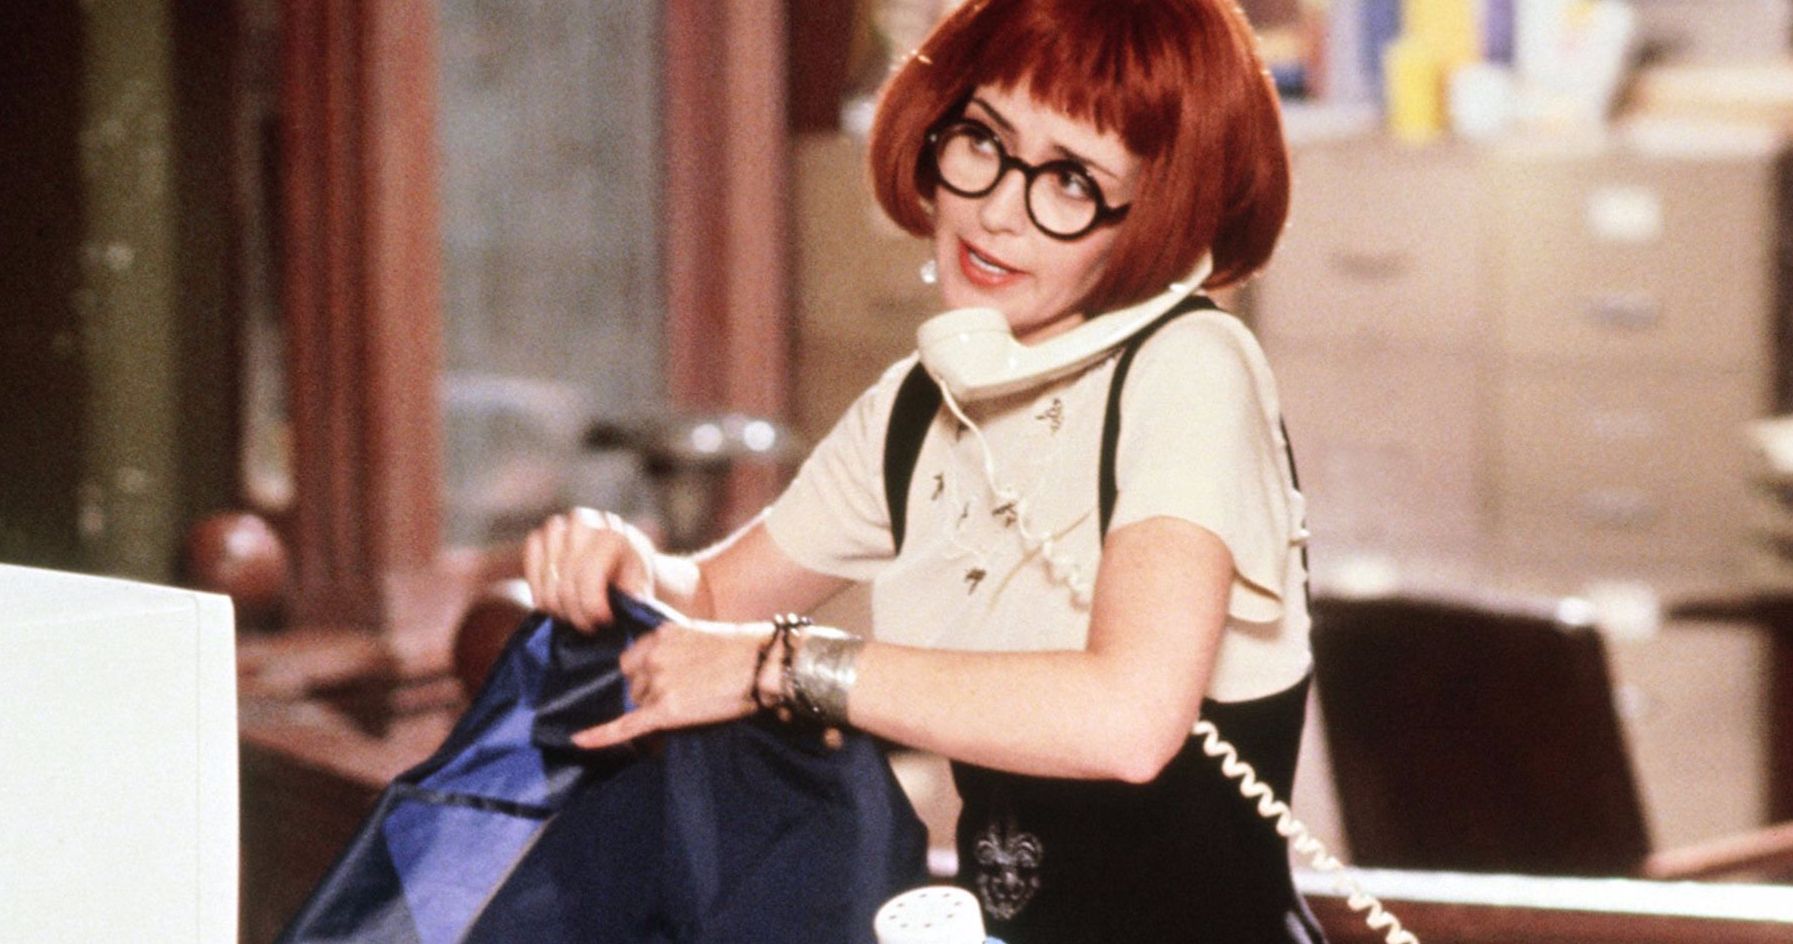 Ghostbusters 3 Is Most Likely Bringing Back Annie Potts as Janine Melnitz